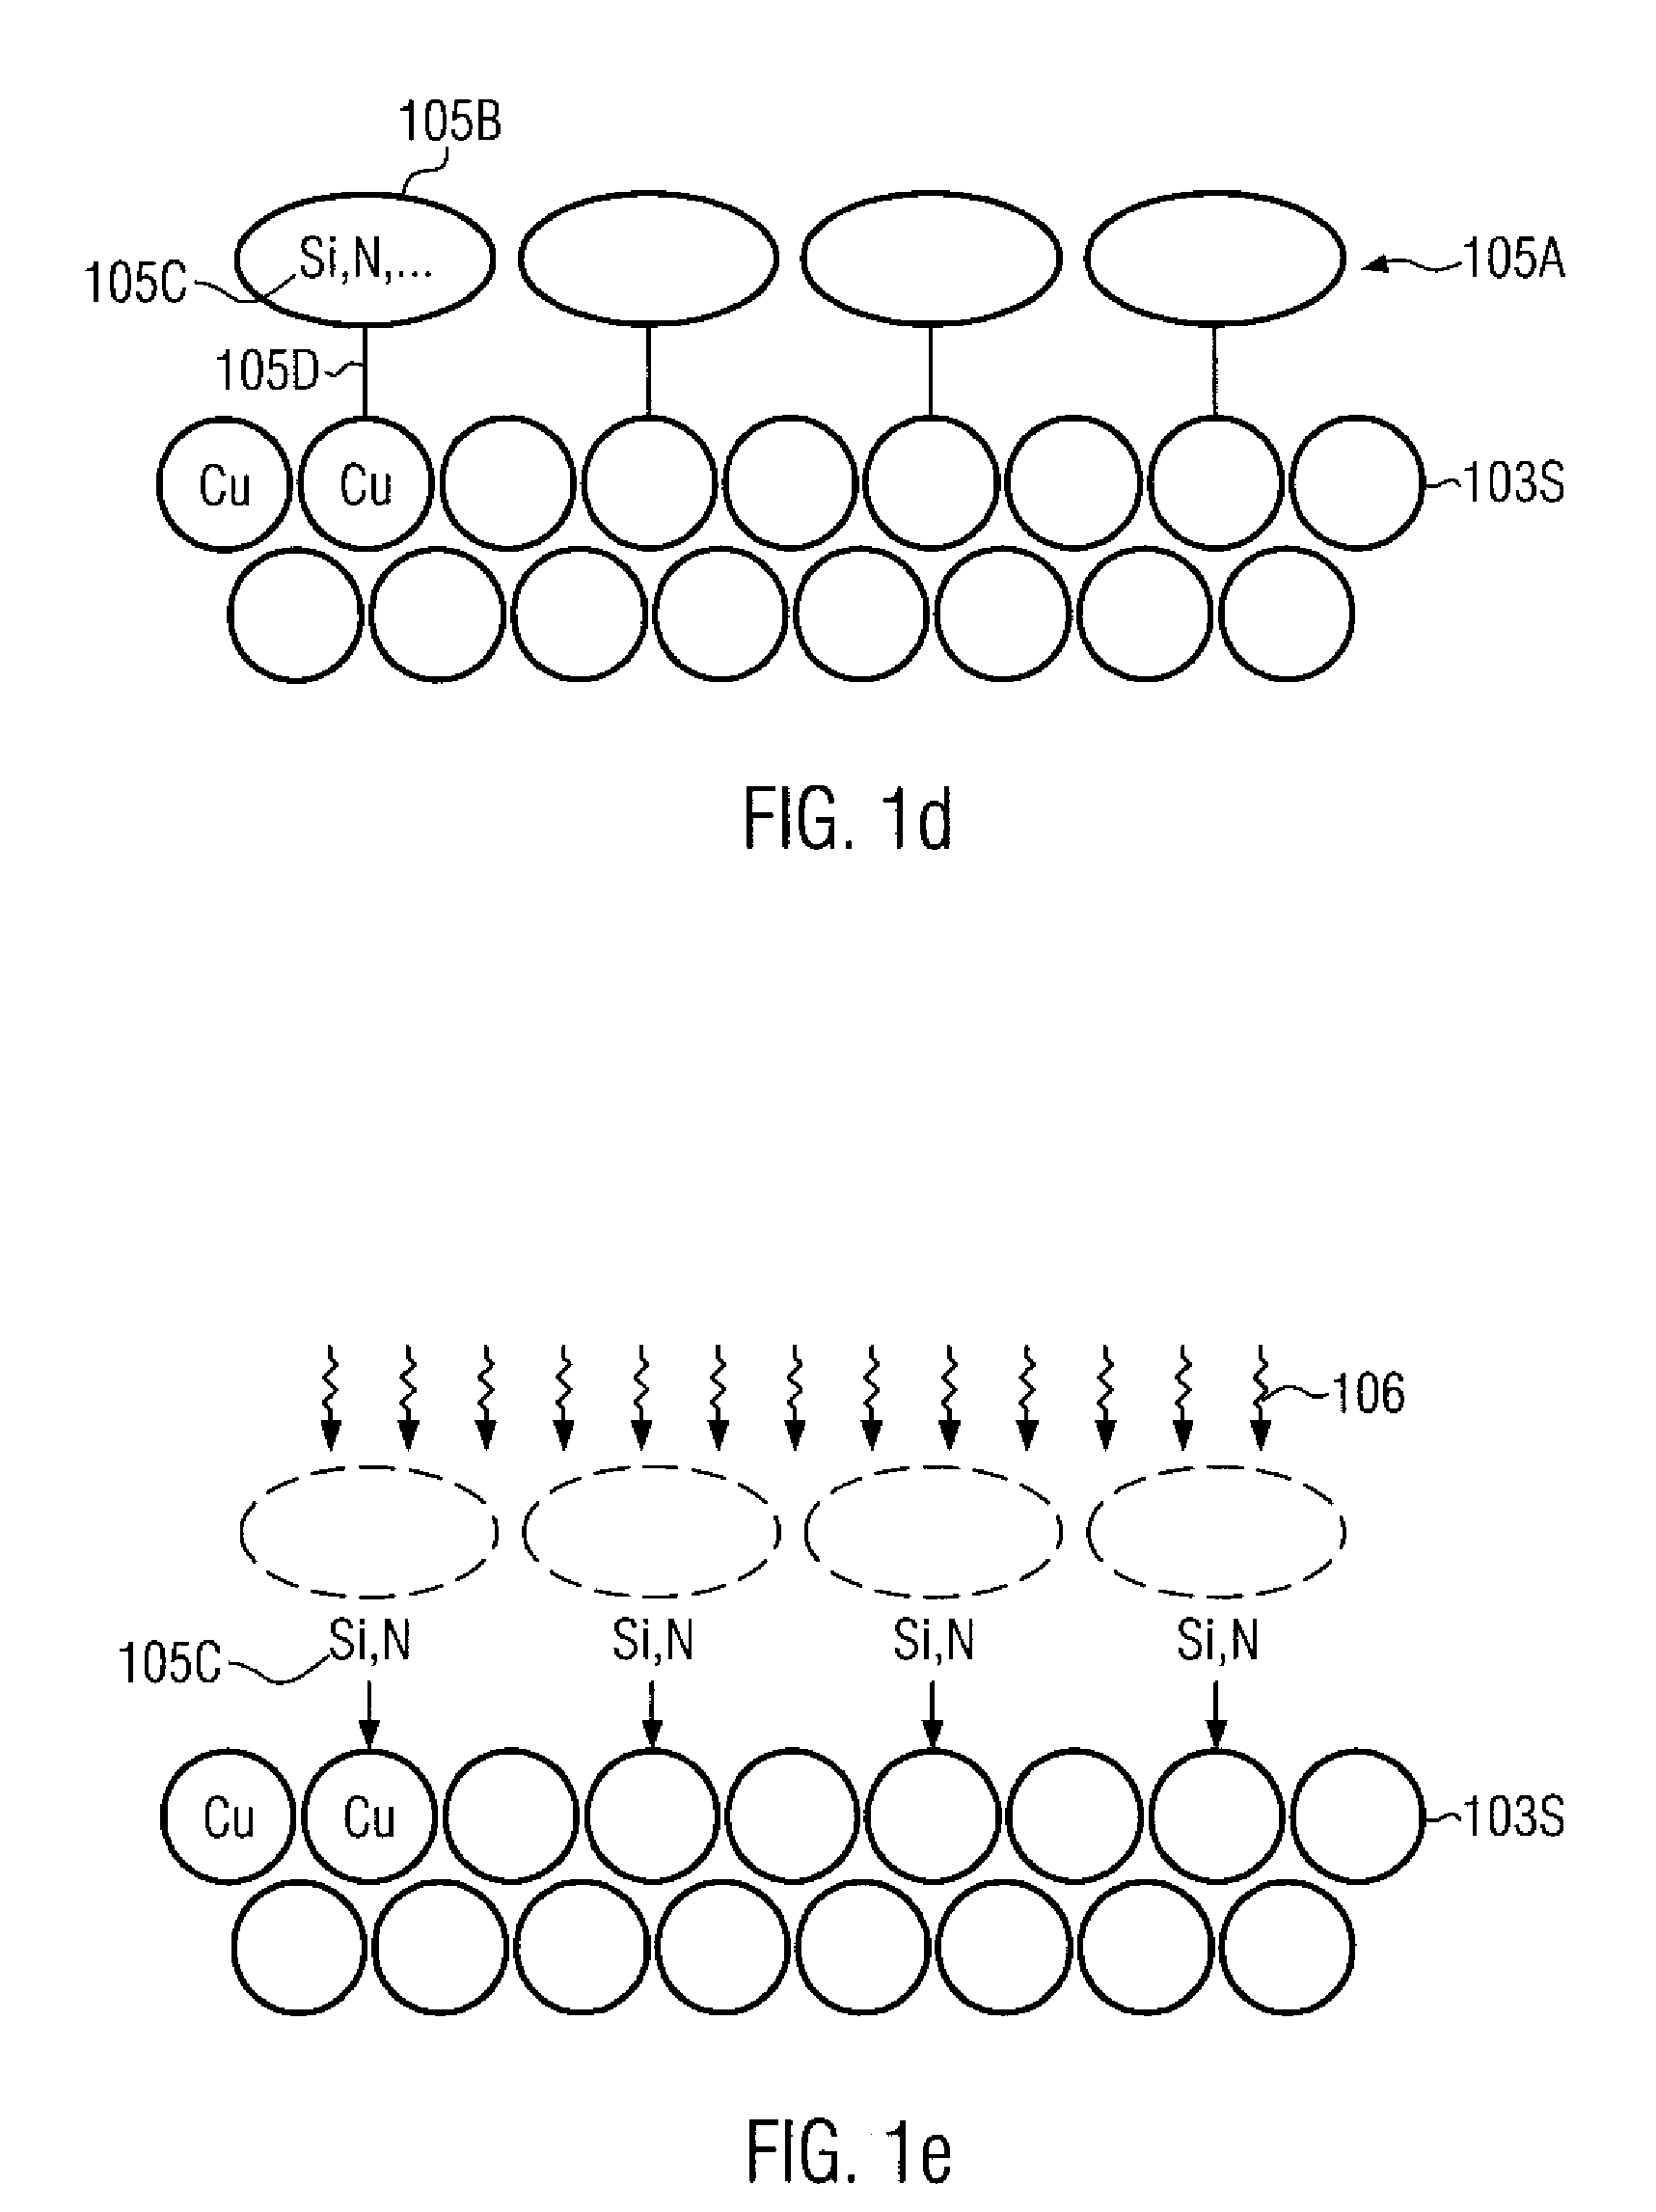 Method for forming a self-aligned nitrogen-containing copper silicide capping layer in a microstructure device